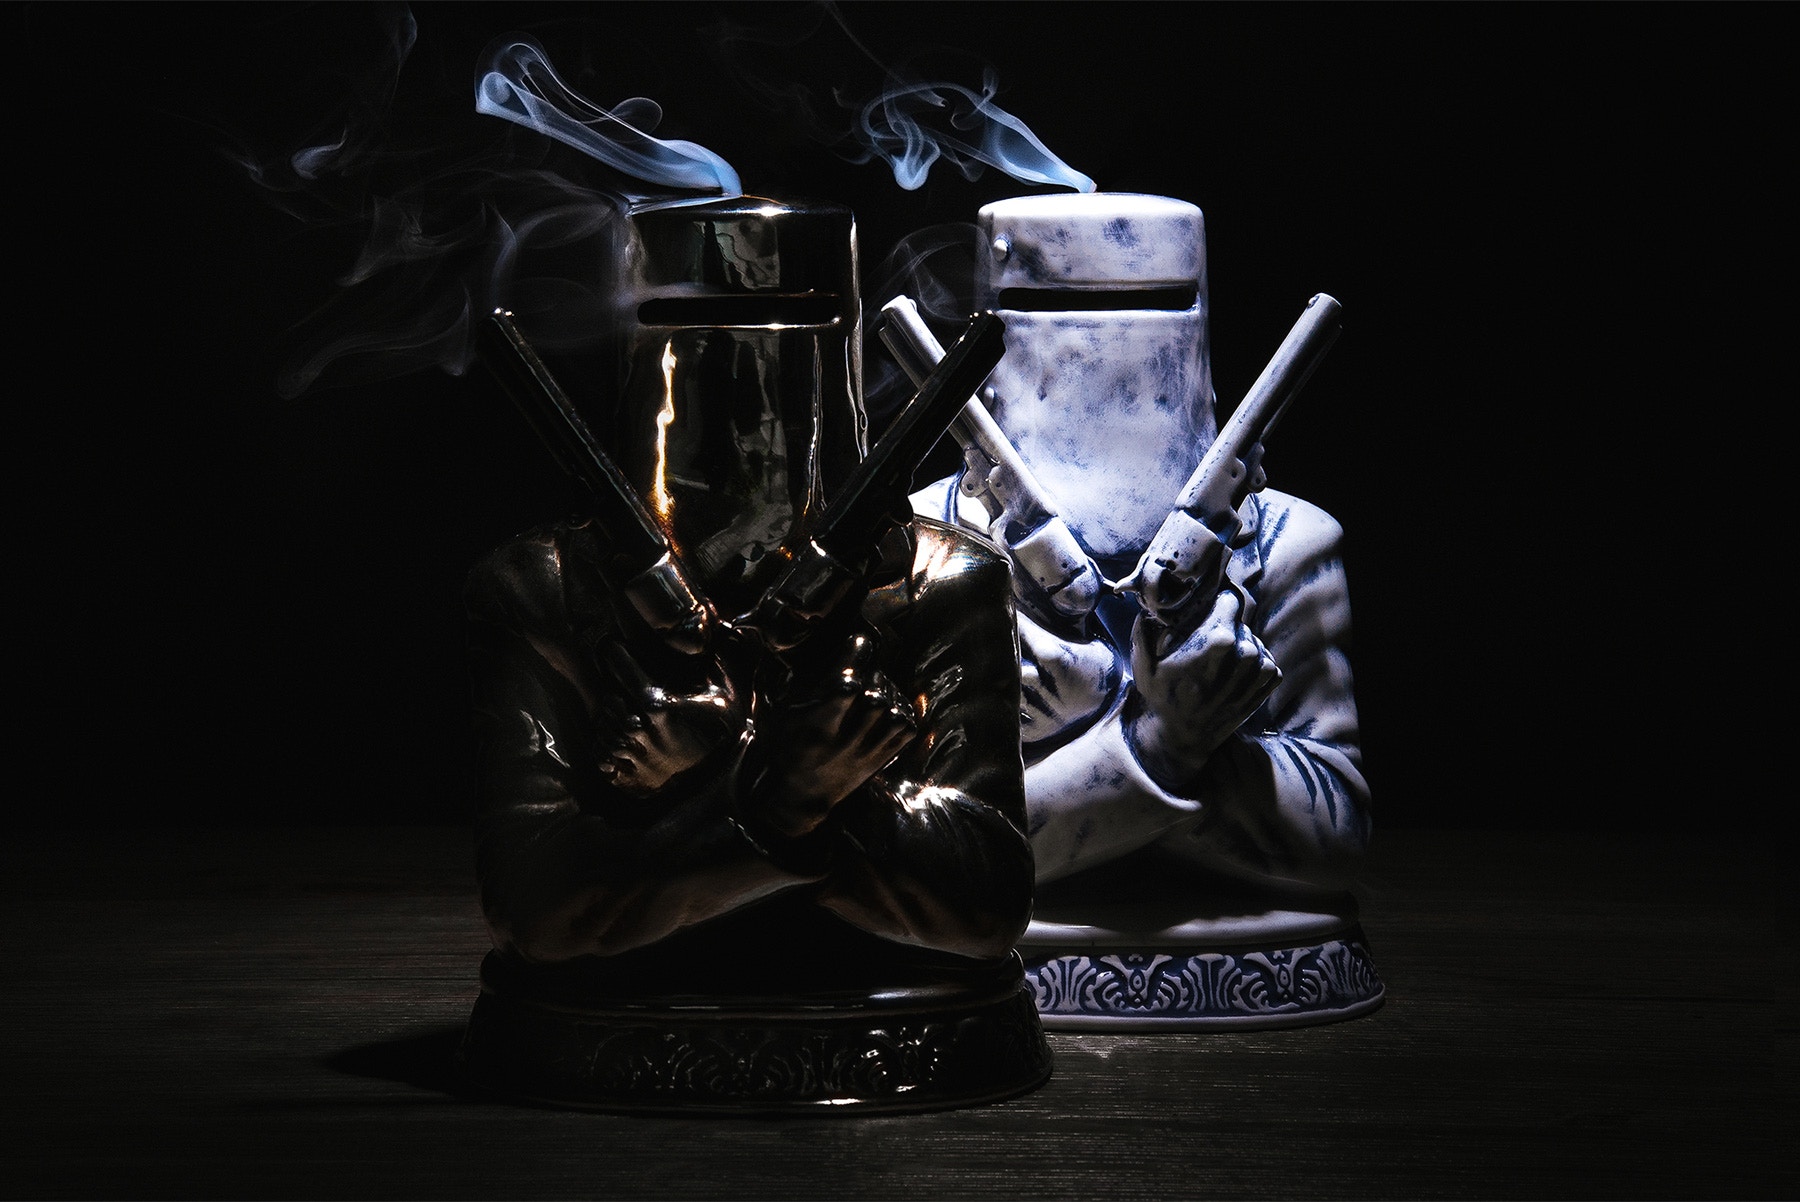 SUPPLY store reveals a limited incense chamber in collaboration 